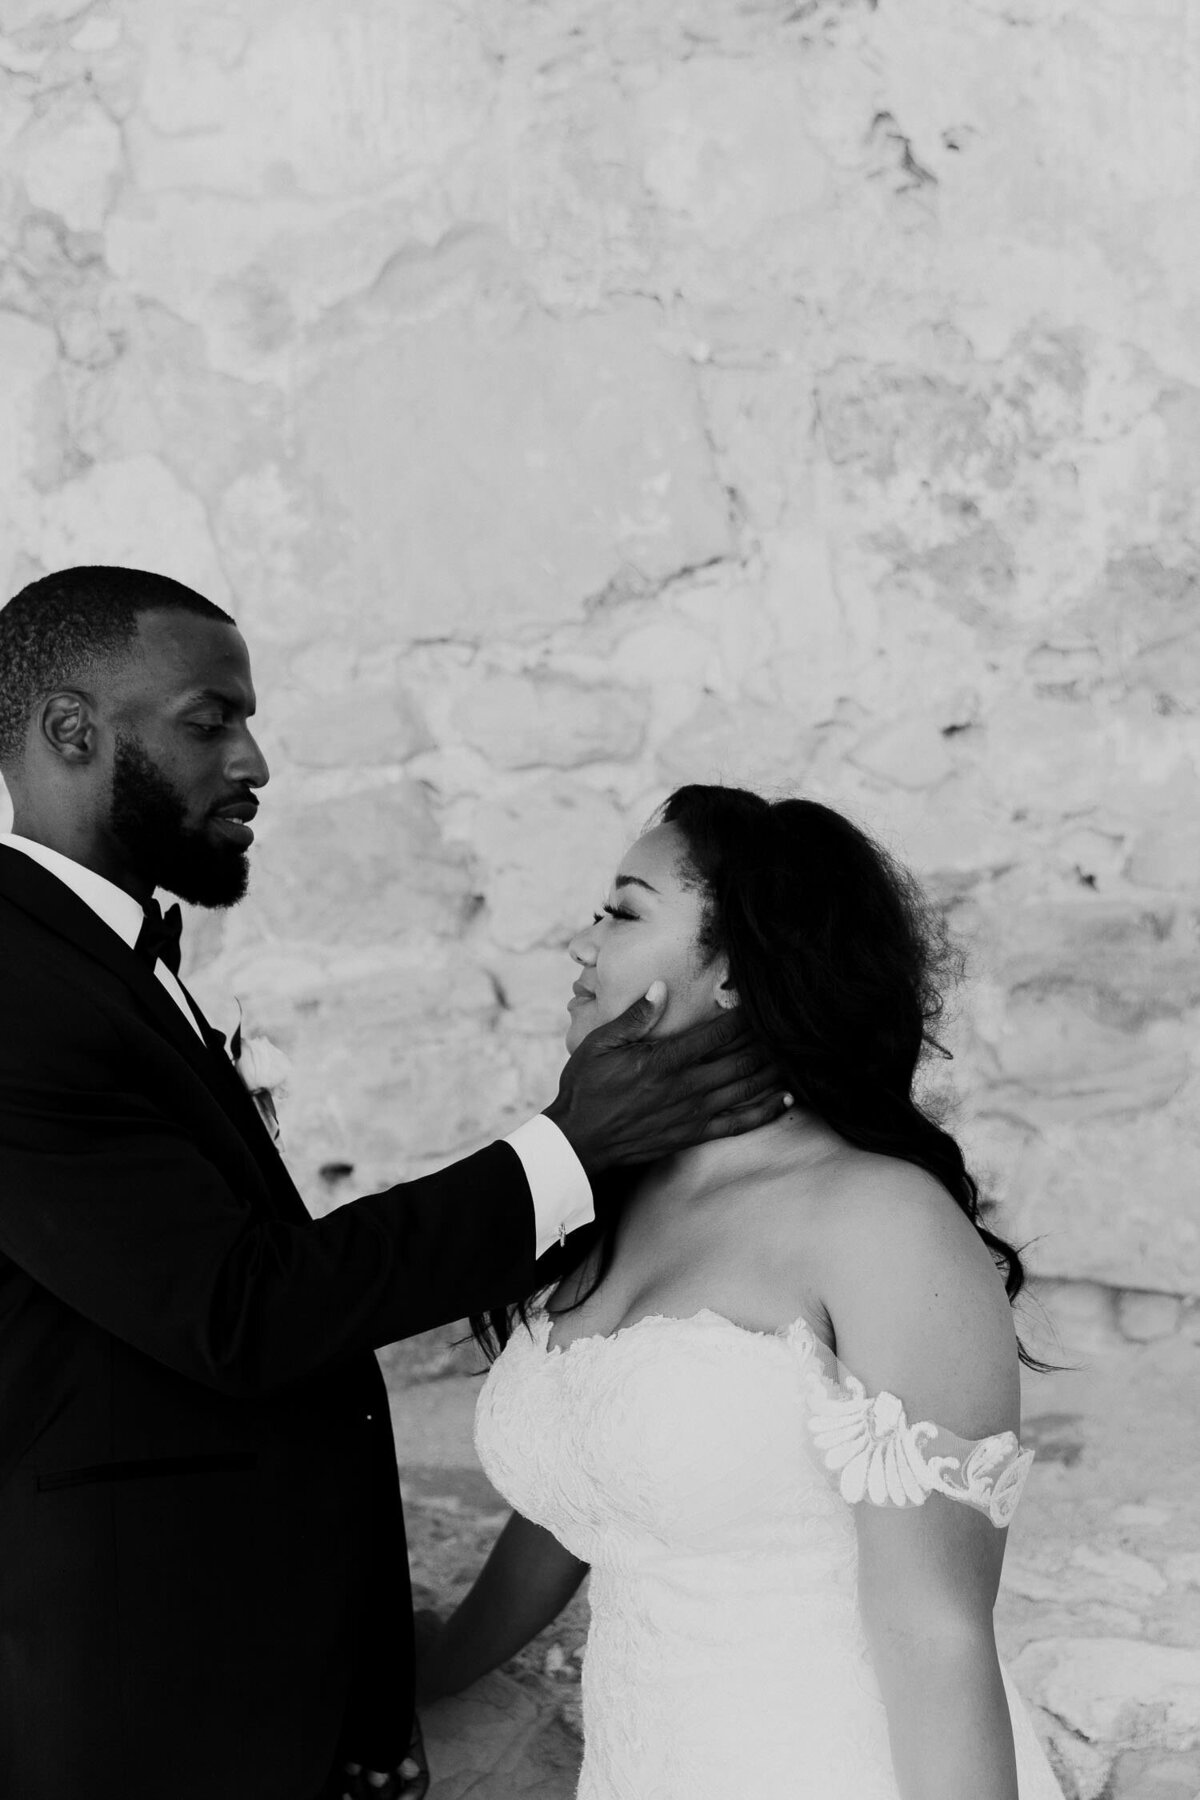 Groom is touching brides cheek during intimate moment at Mission San Juan Capistrano